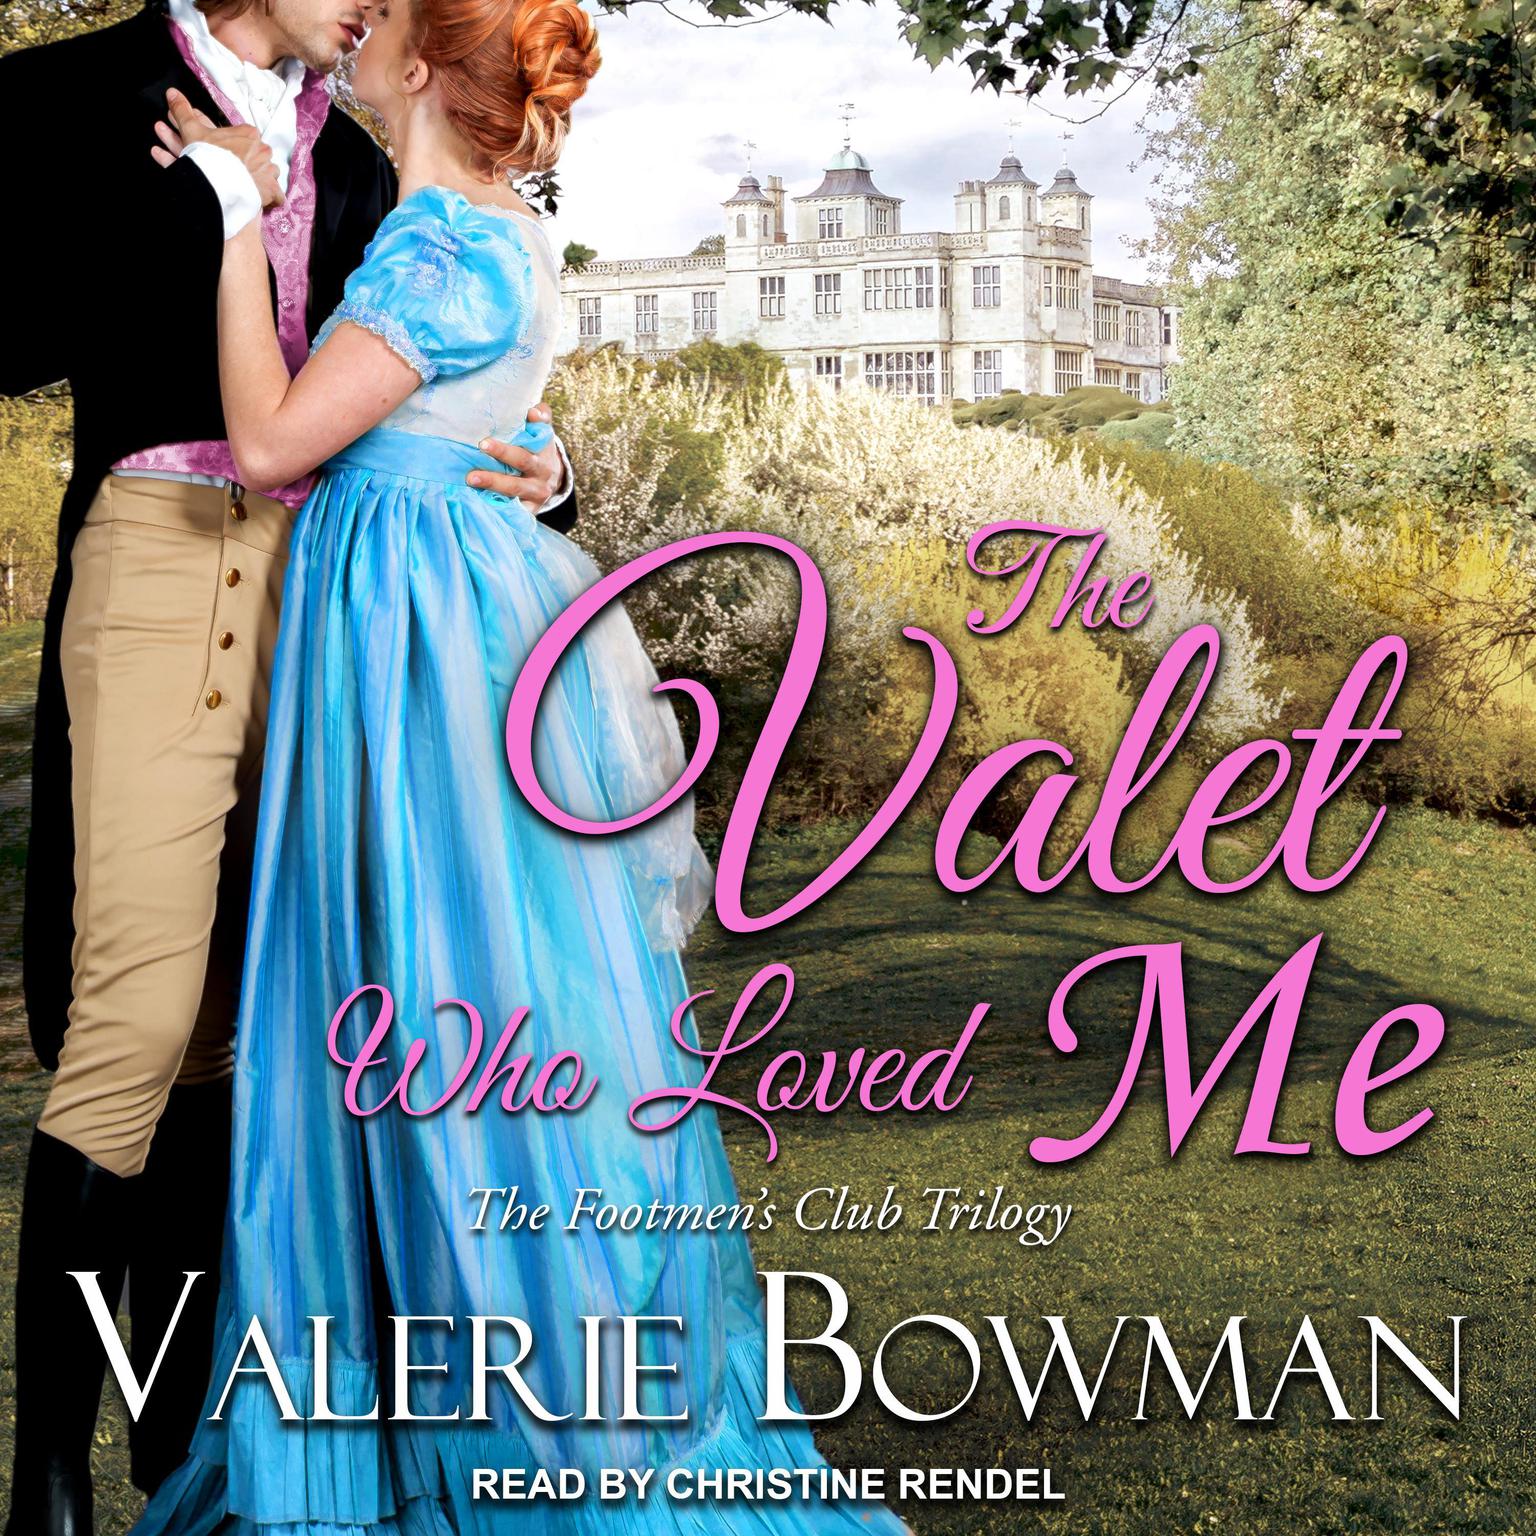 The Valet Who Loved Me Audiobook, by Valerie Bowman